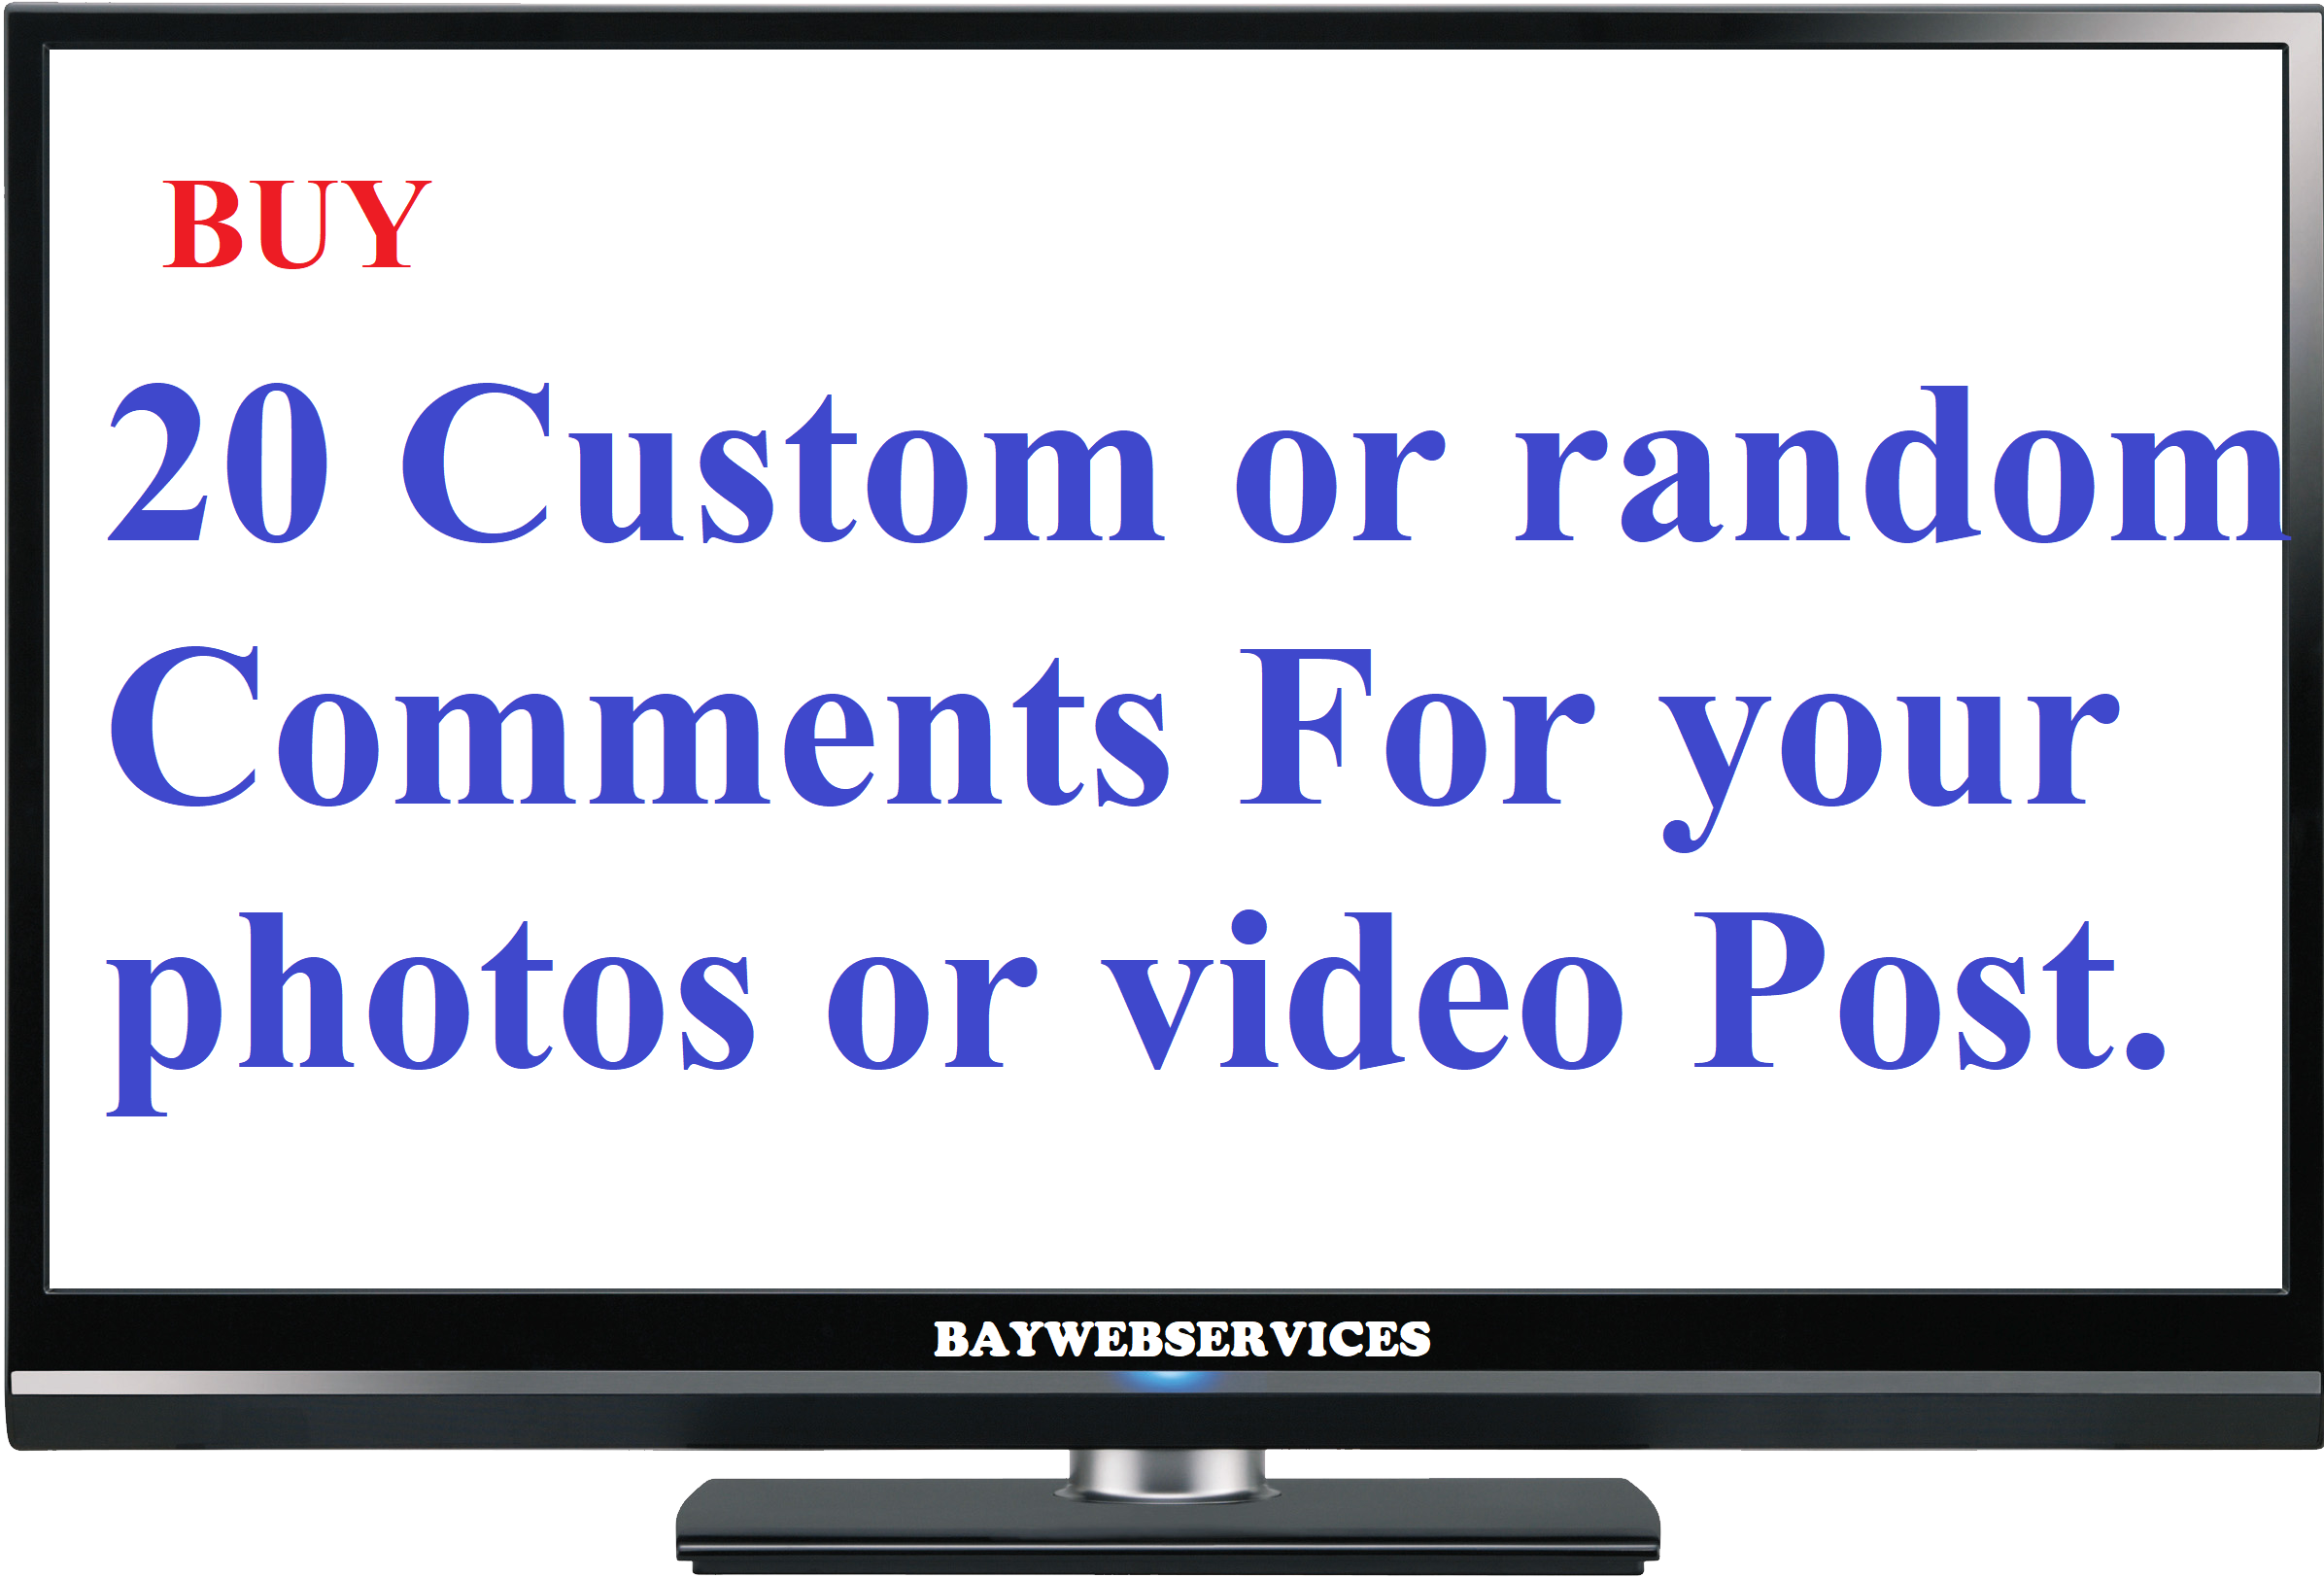 20 Custom or random Comments for Ph0tos P0sts